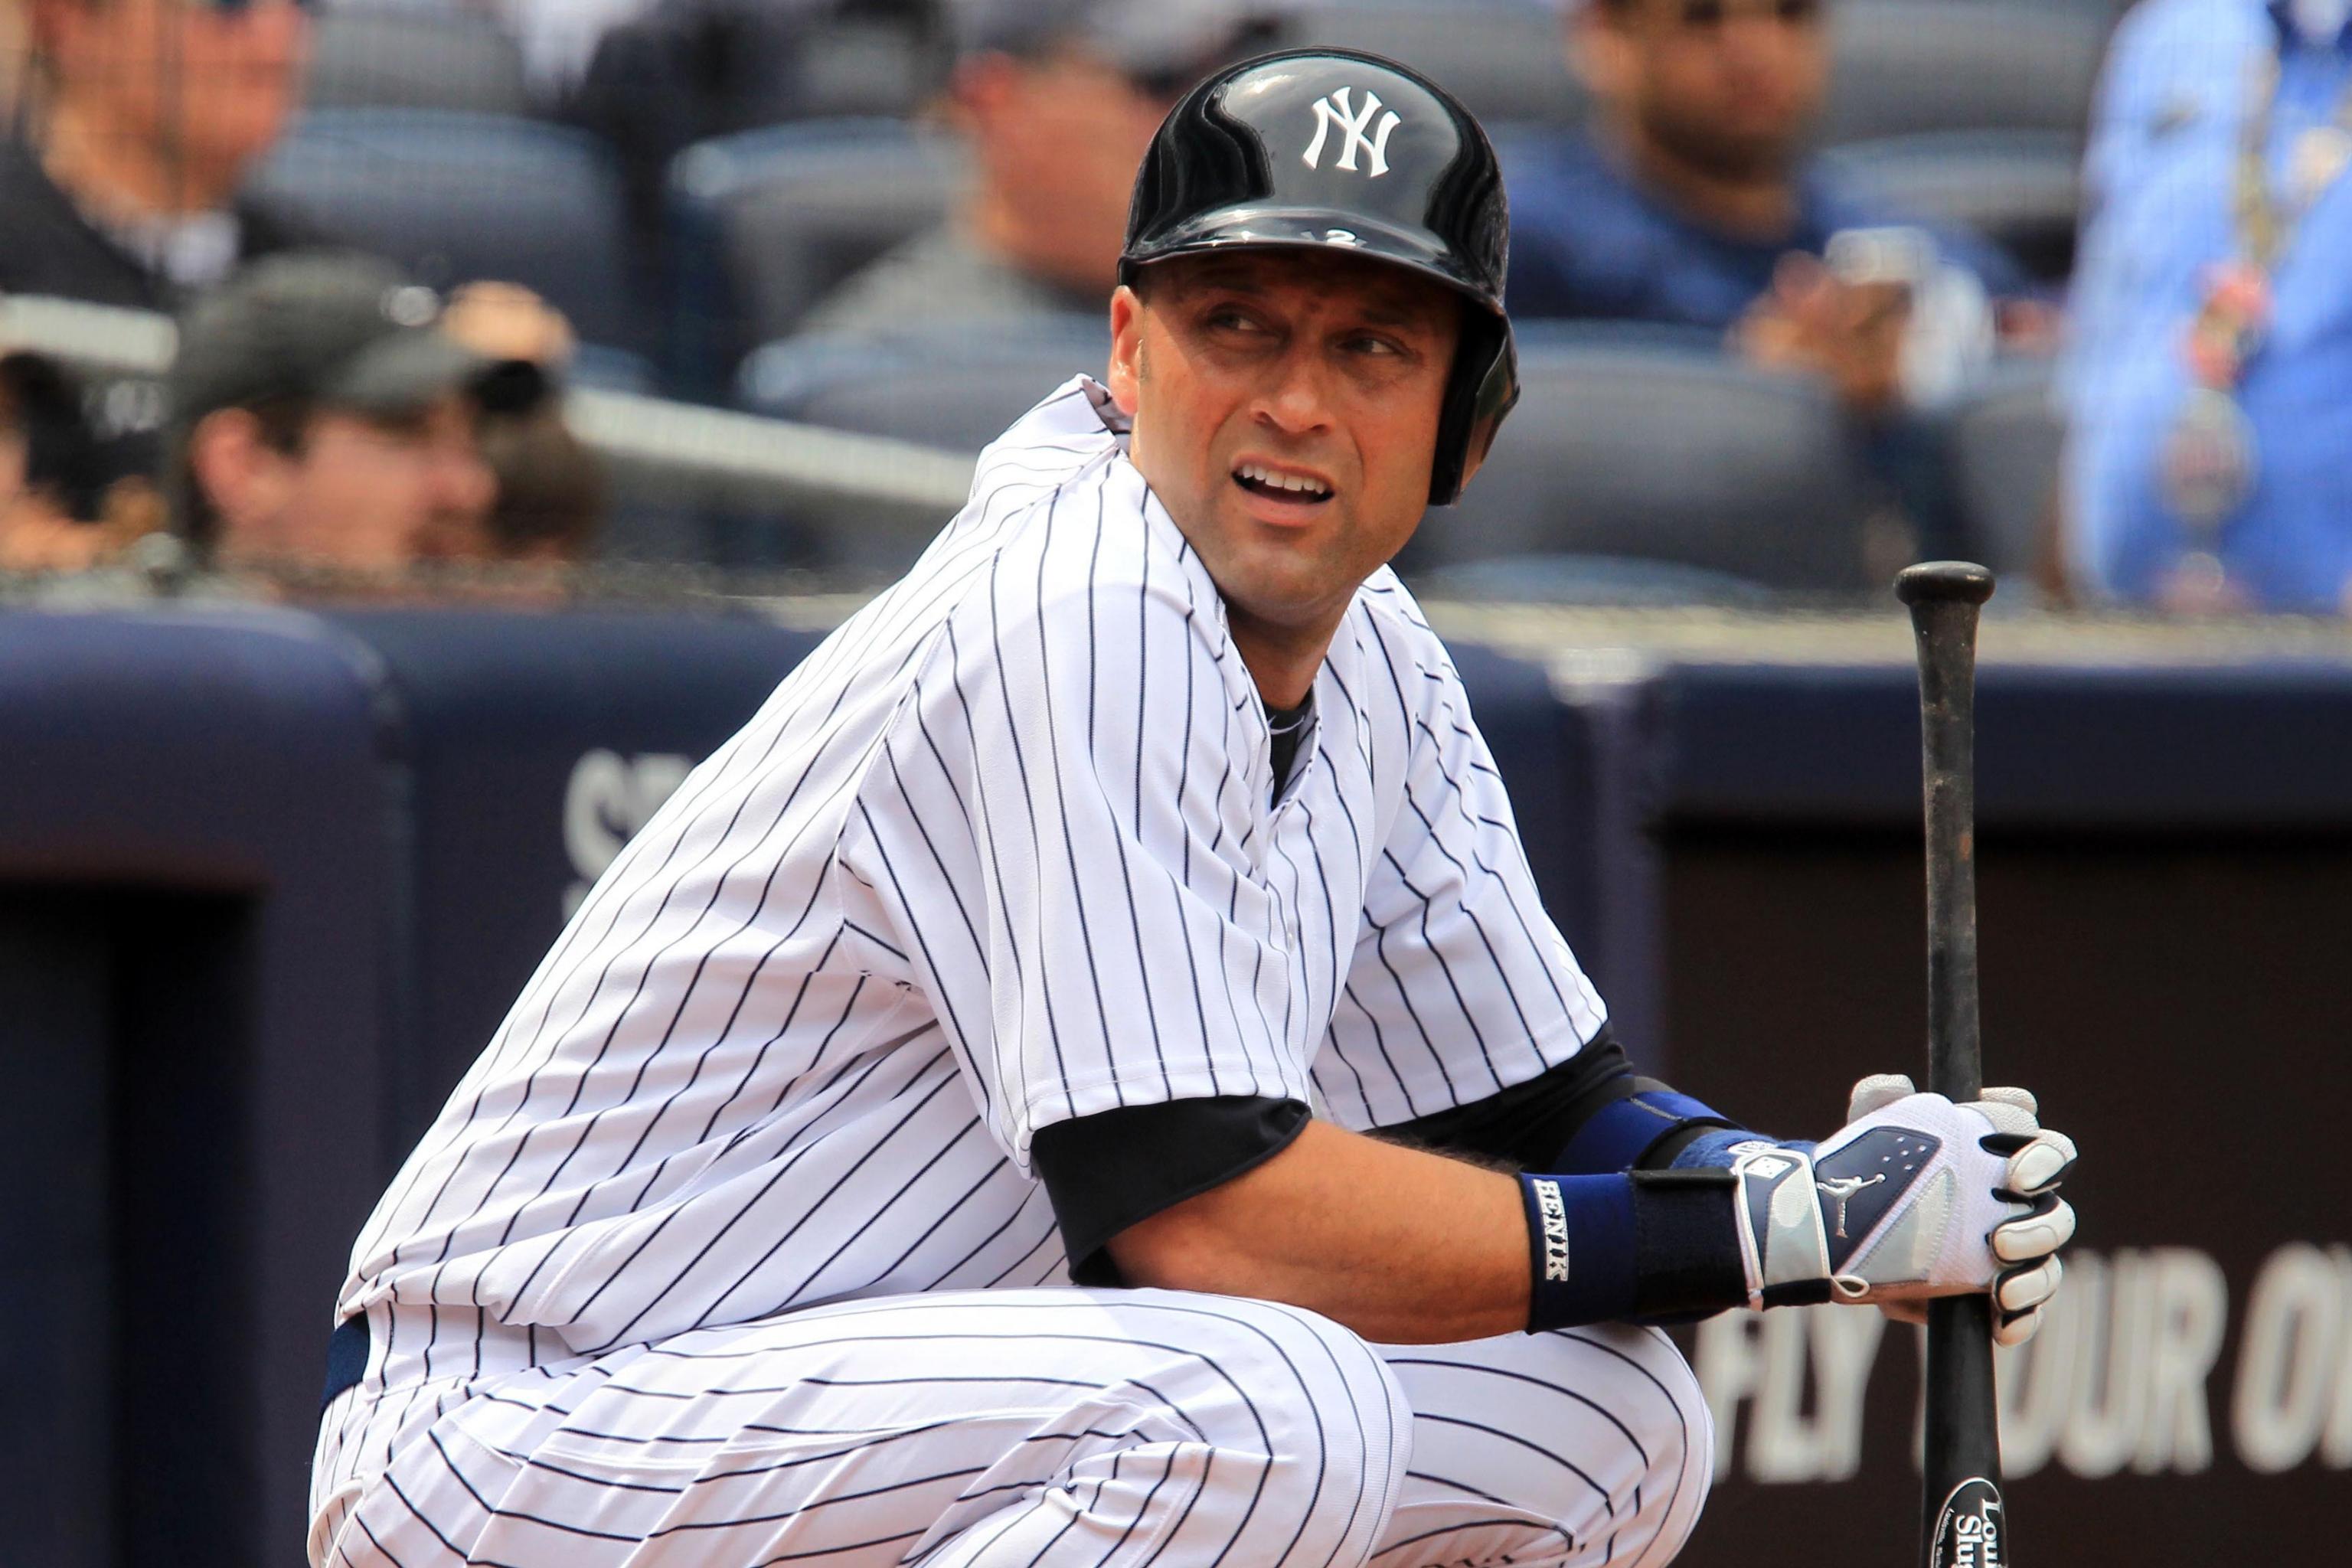 Yankees' Teixeira Expected to Avoid Wrist Surgery - The New York Times